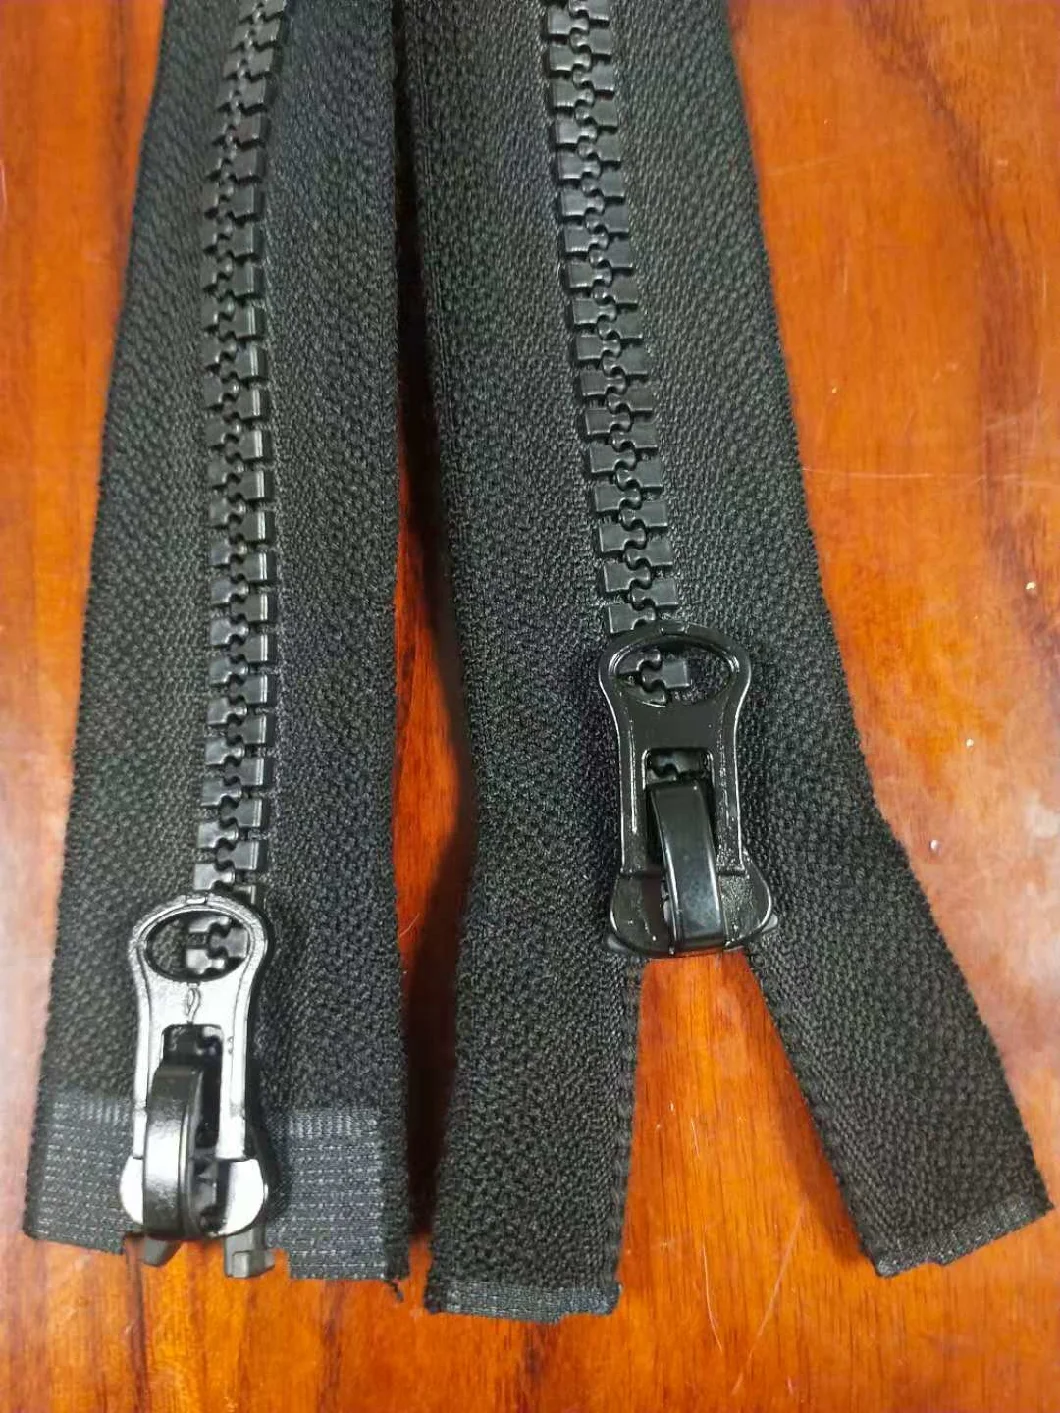 5# 60cm Fr Fireproof Zippers 50%Aramid and 50% Polyester